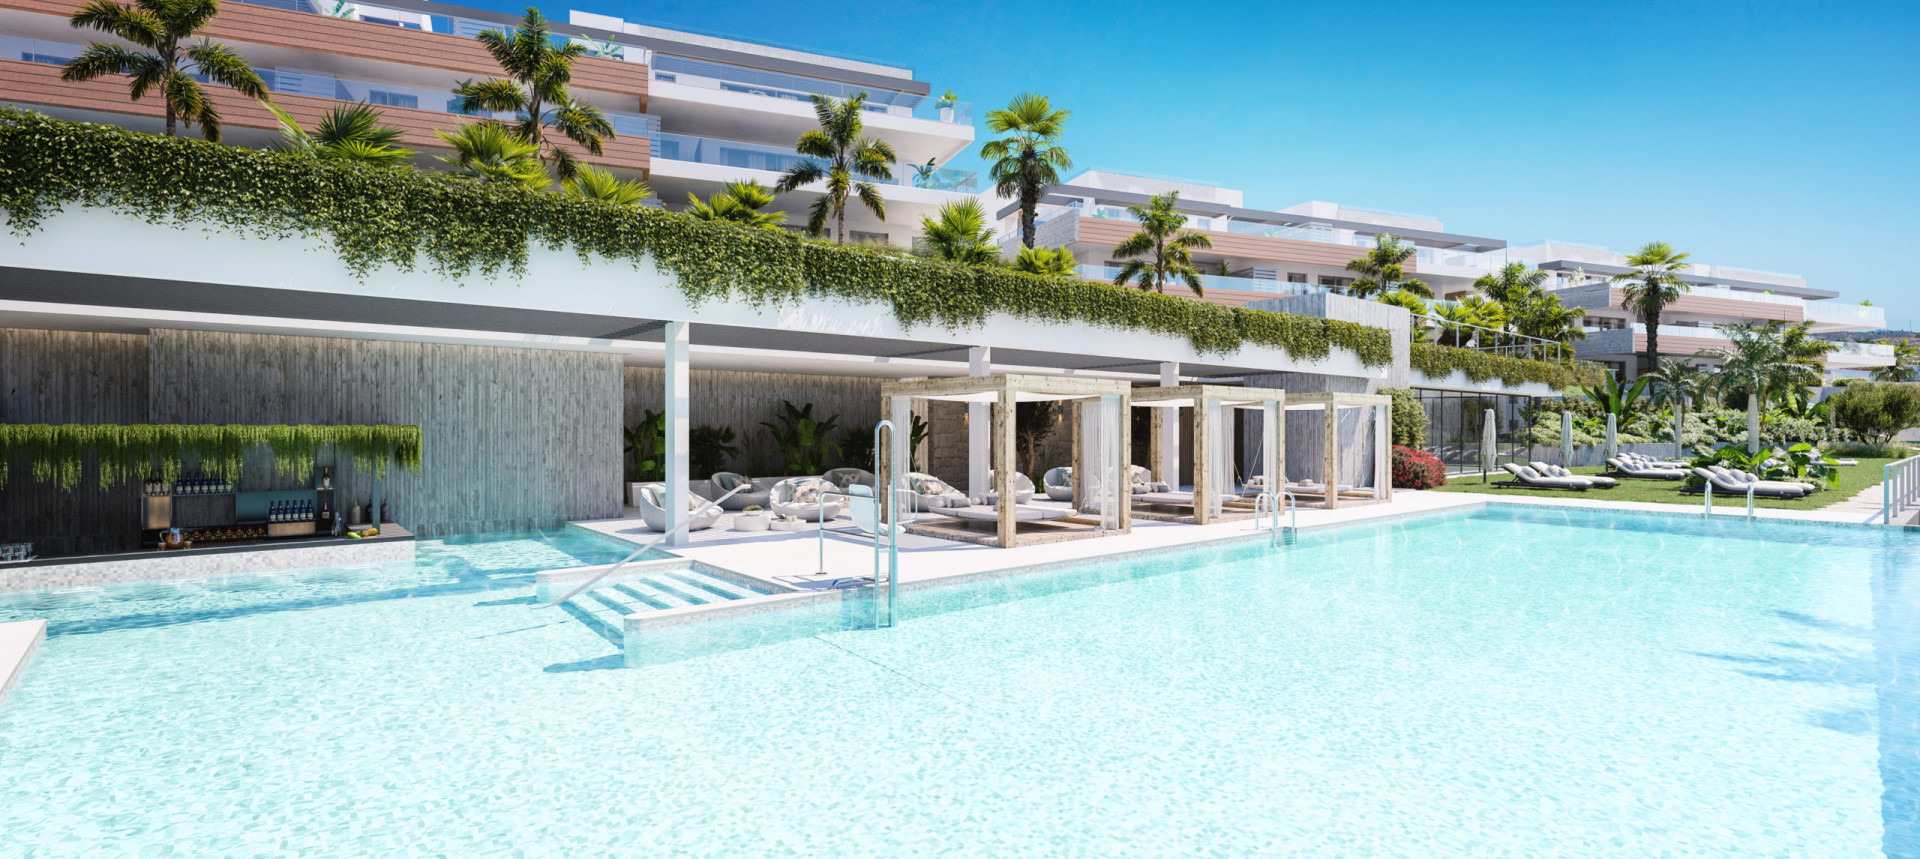 Quintessence: New residential project of 96 flats and penthouses located east of Marbella. | Image 13